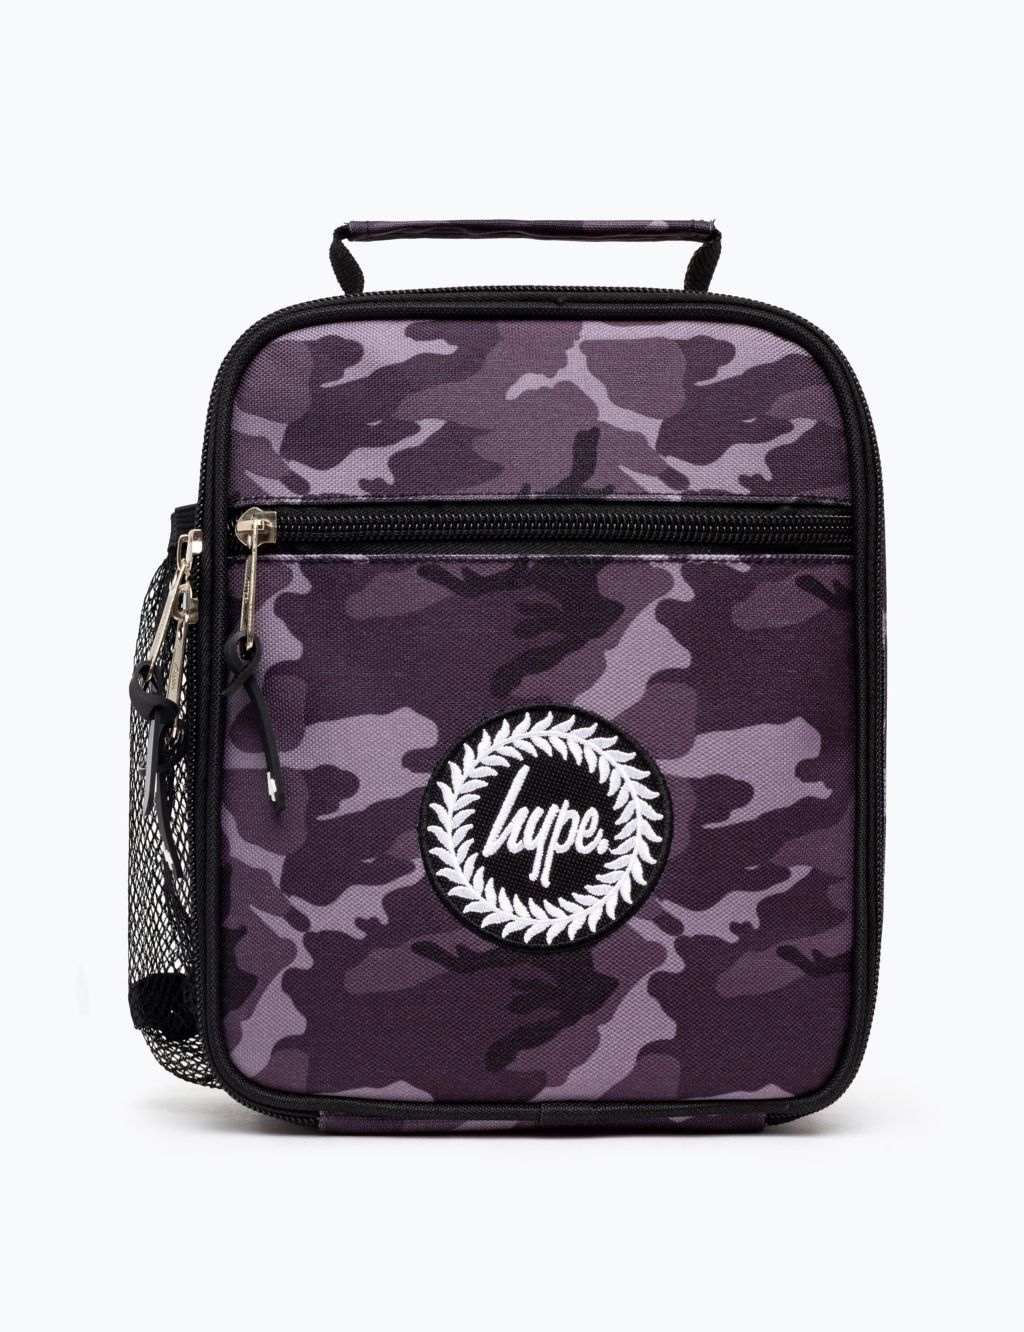 Kids' Camouflage Print Lunch Box image 1